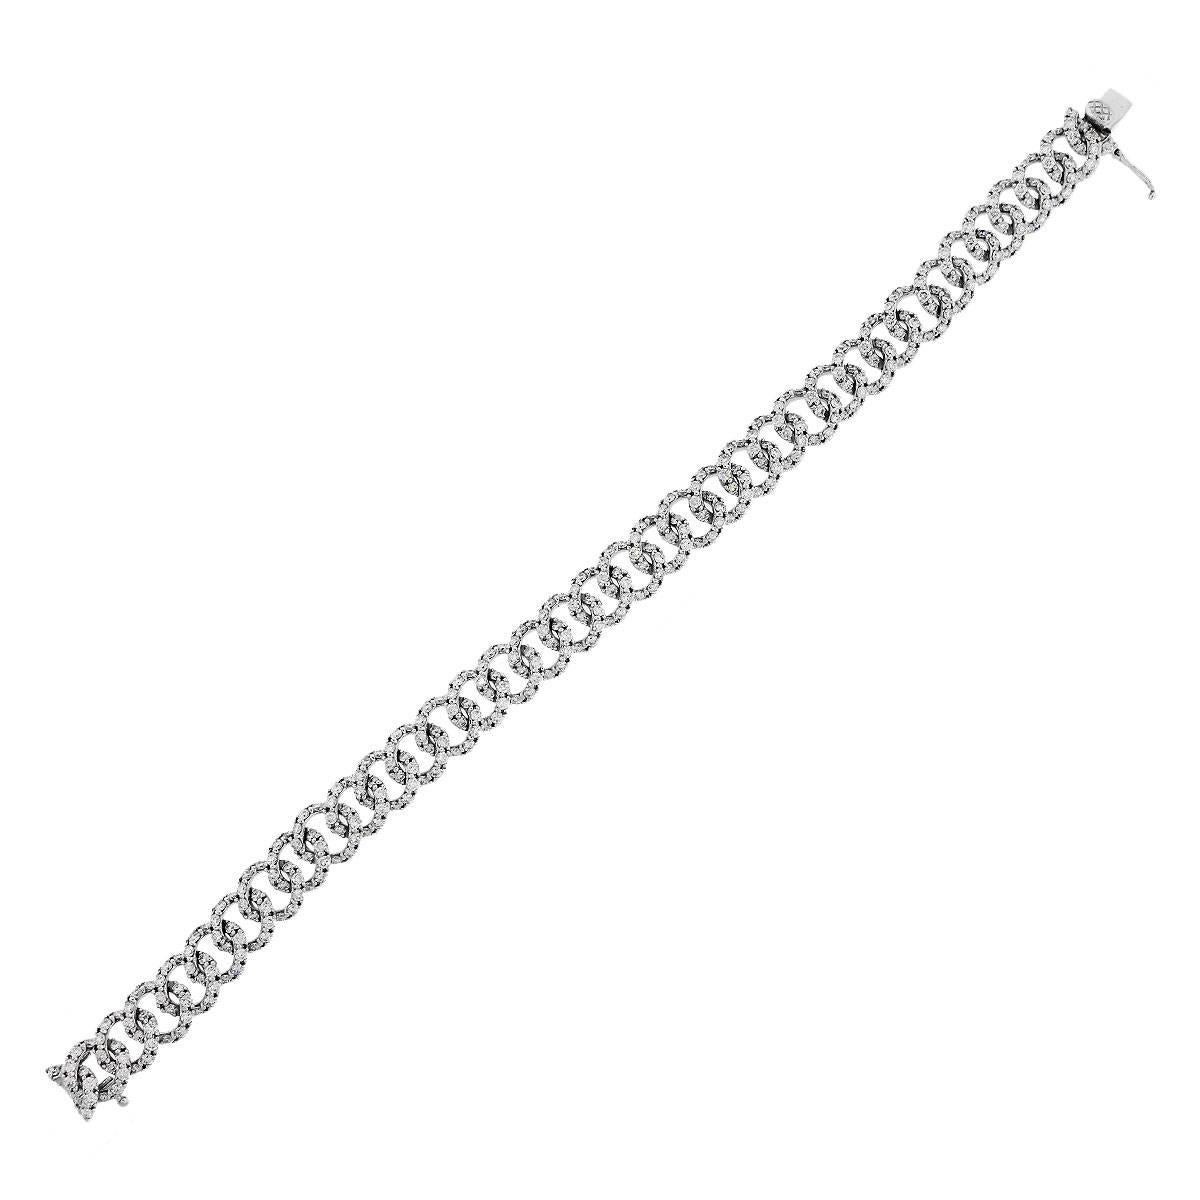 Material: 18k white gold
Diamond Details: Approximately 6.59ctw of round brilliant diamonds. Diamonds are G/H in color and VS in clarity
Fastening: Tongue in box clasp with safety latch
Length: Will fit a 7.5″ wrist
Item Weight: 26.3g (16.9dwt)
SKU: